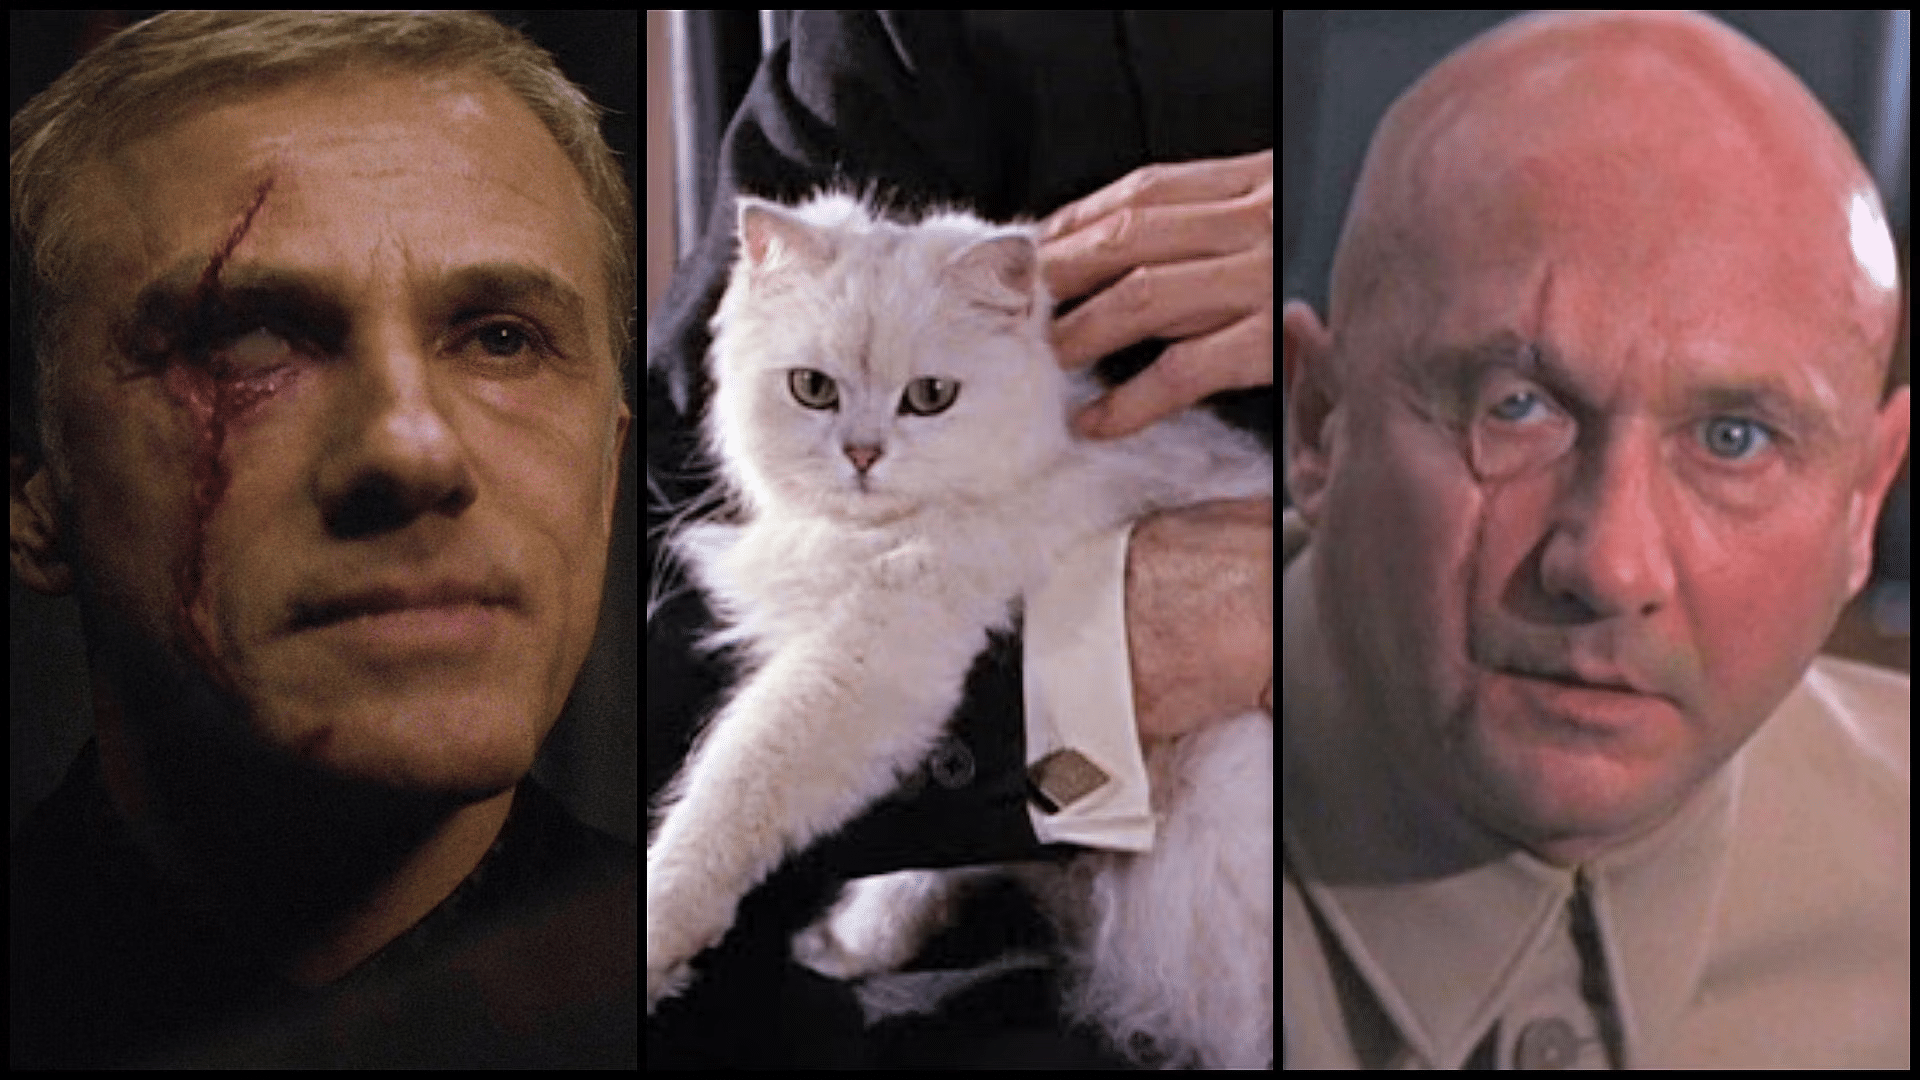 The Best Movie Villains: A Quick Look at Iconic Antagonists